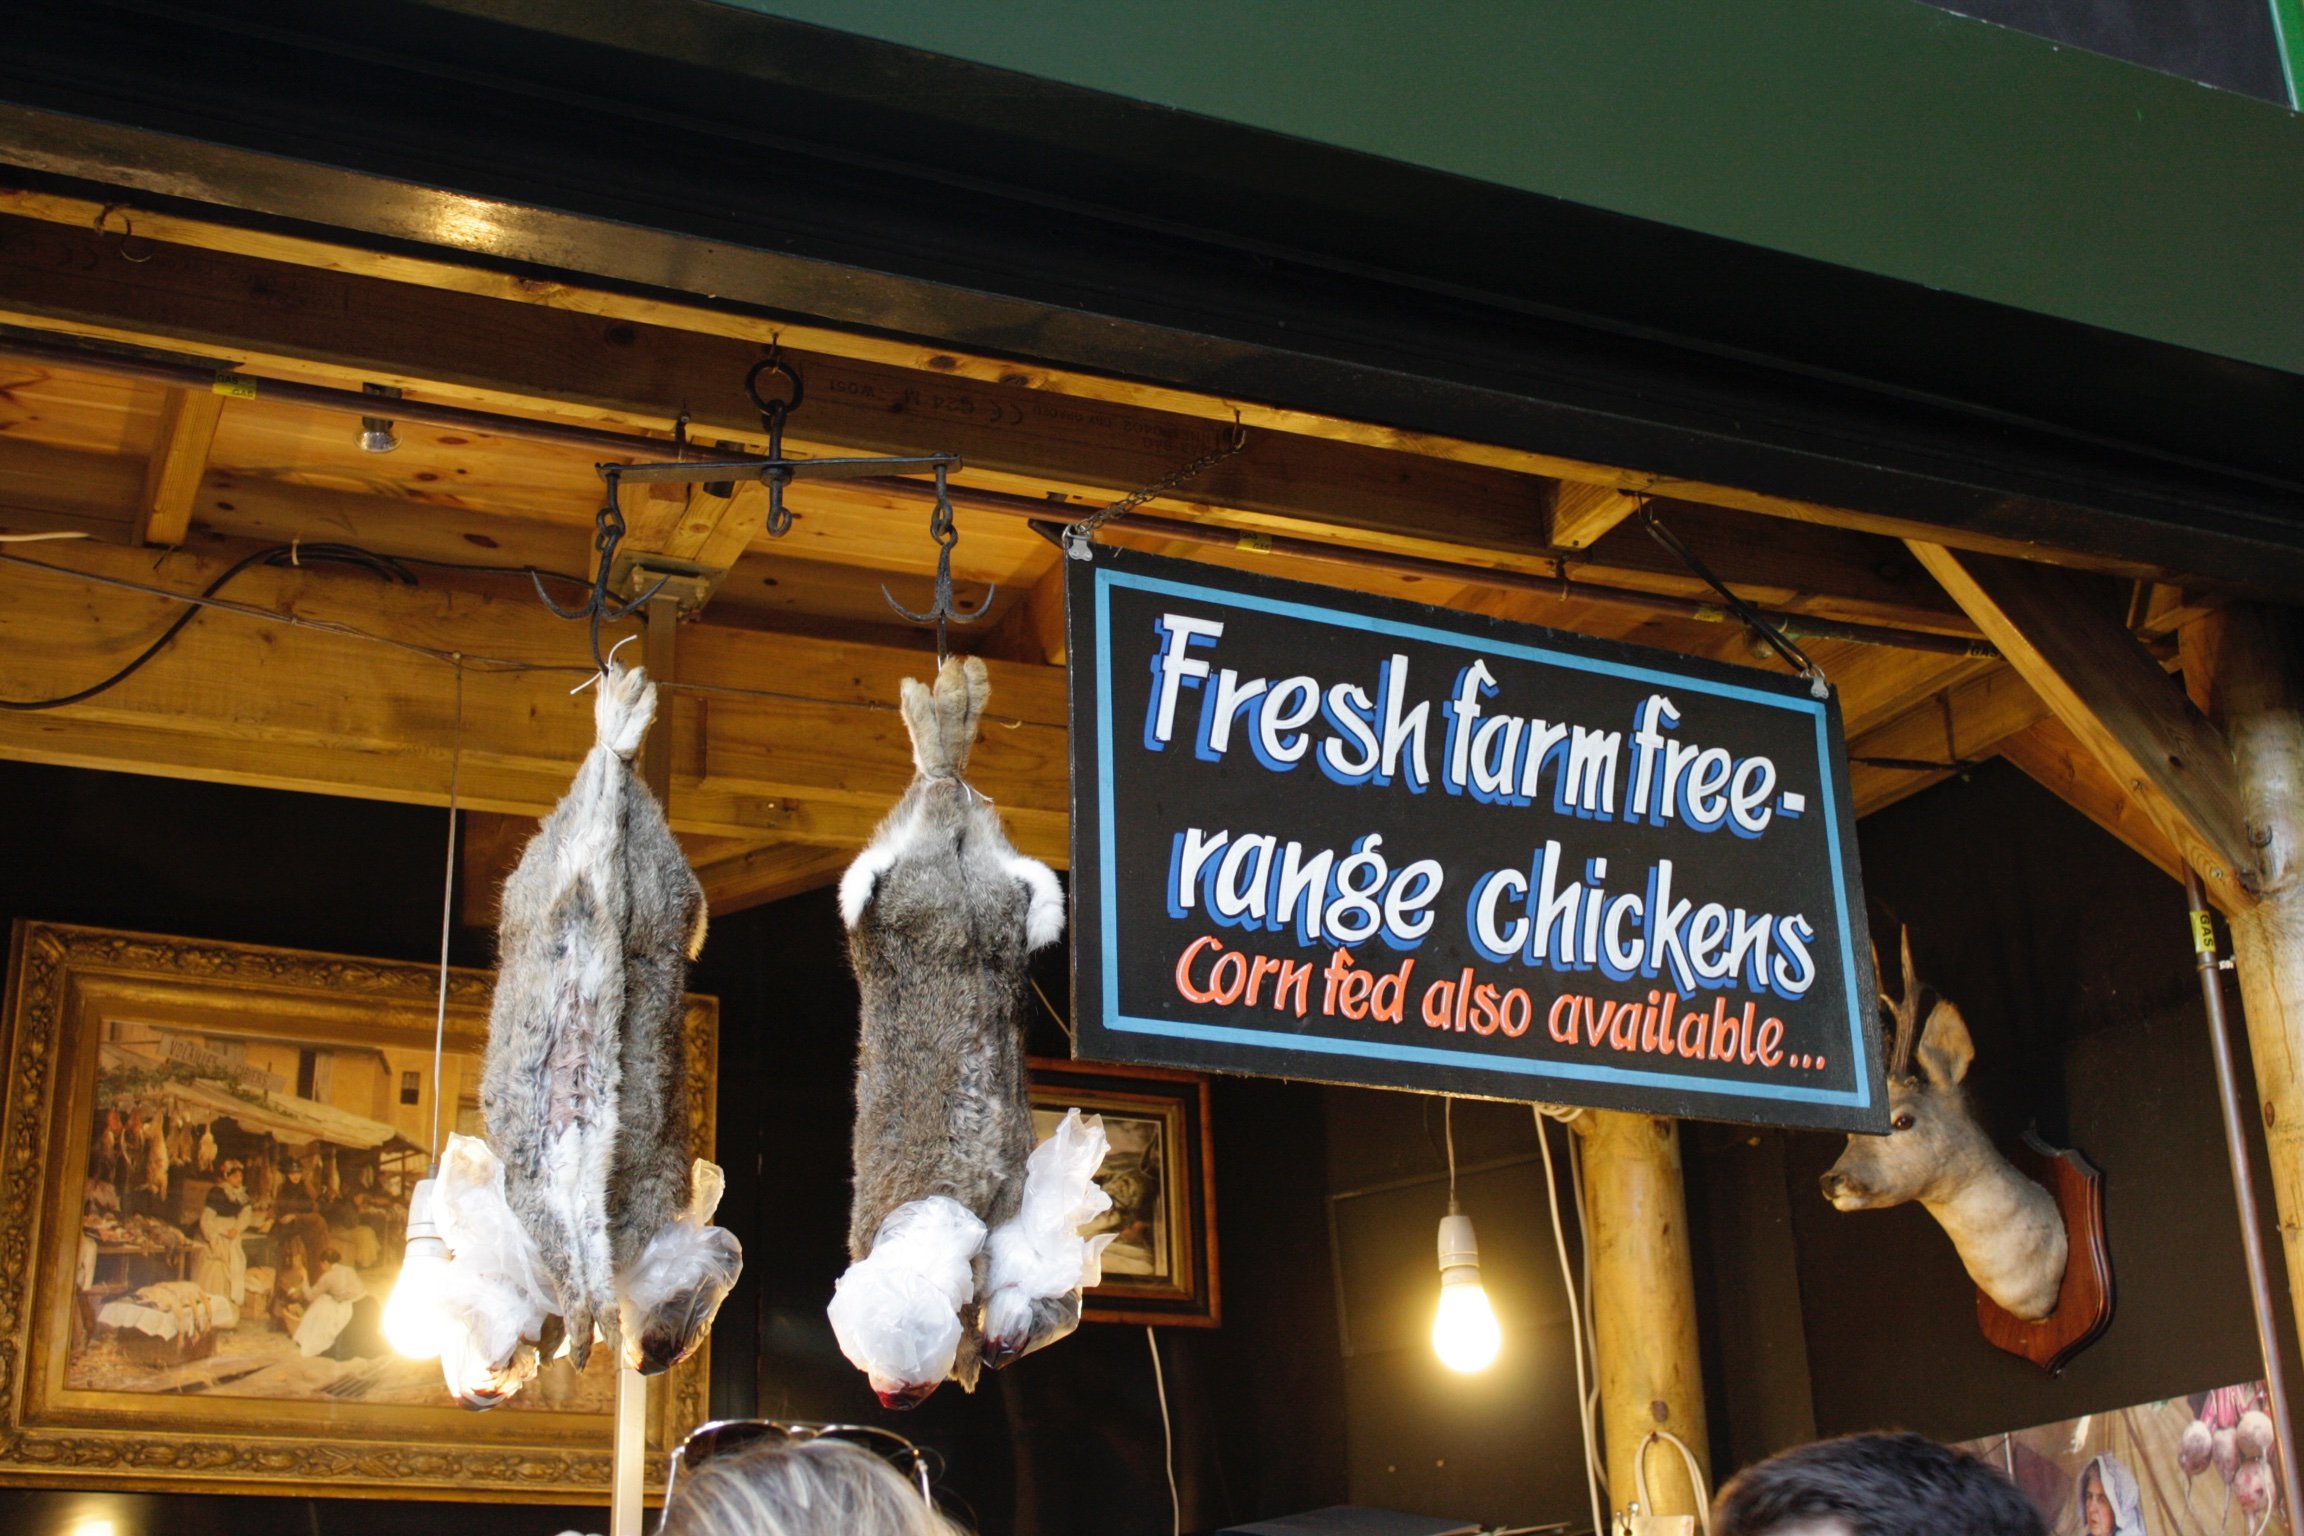 Game rabbits hanging next to a sign for fresh farm free-range chickens at Borough Market